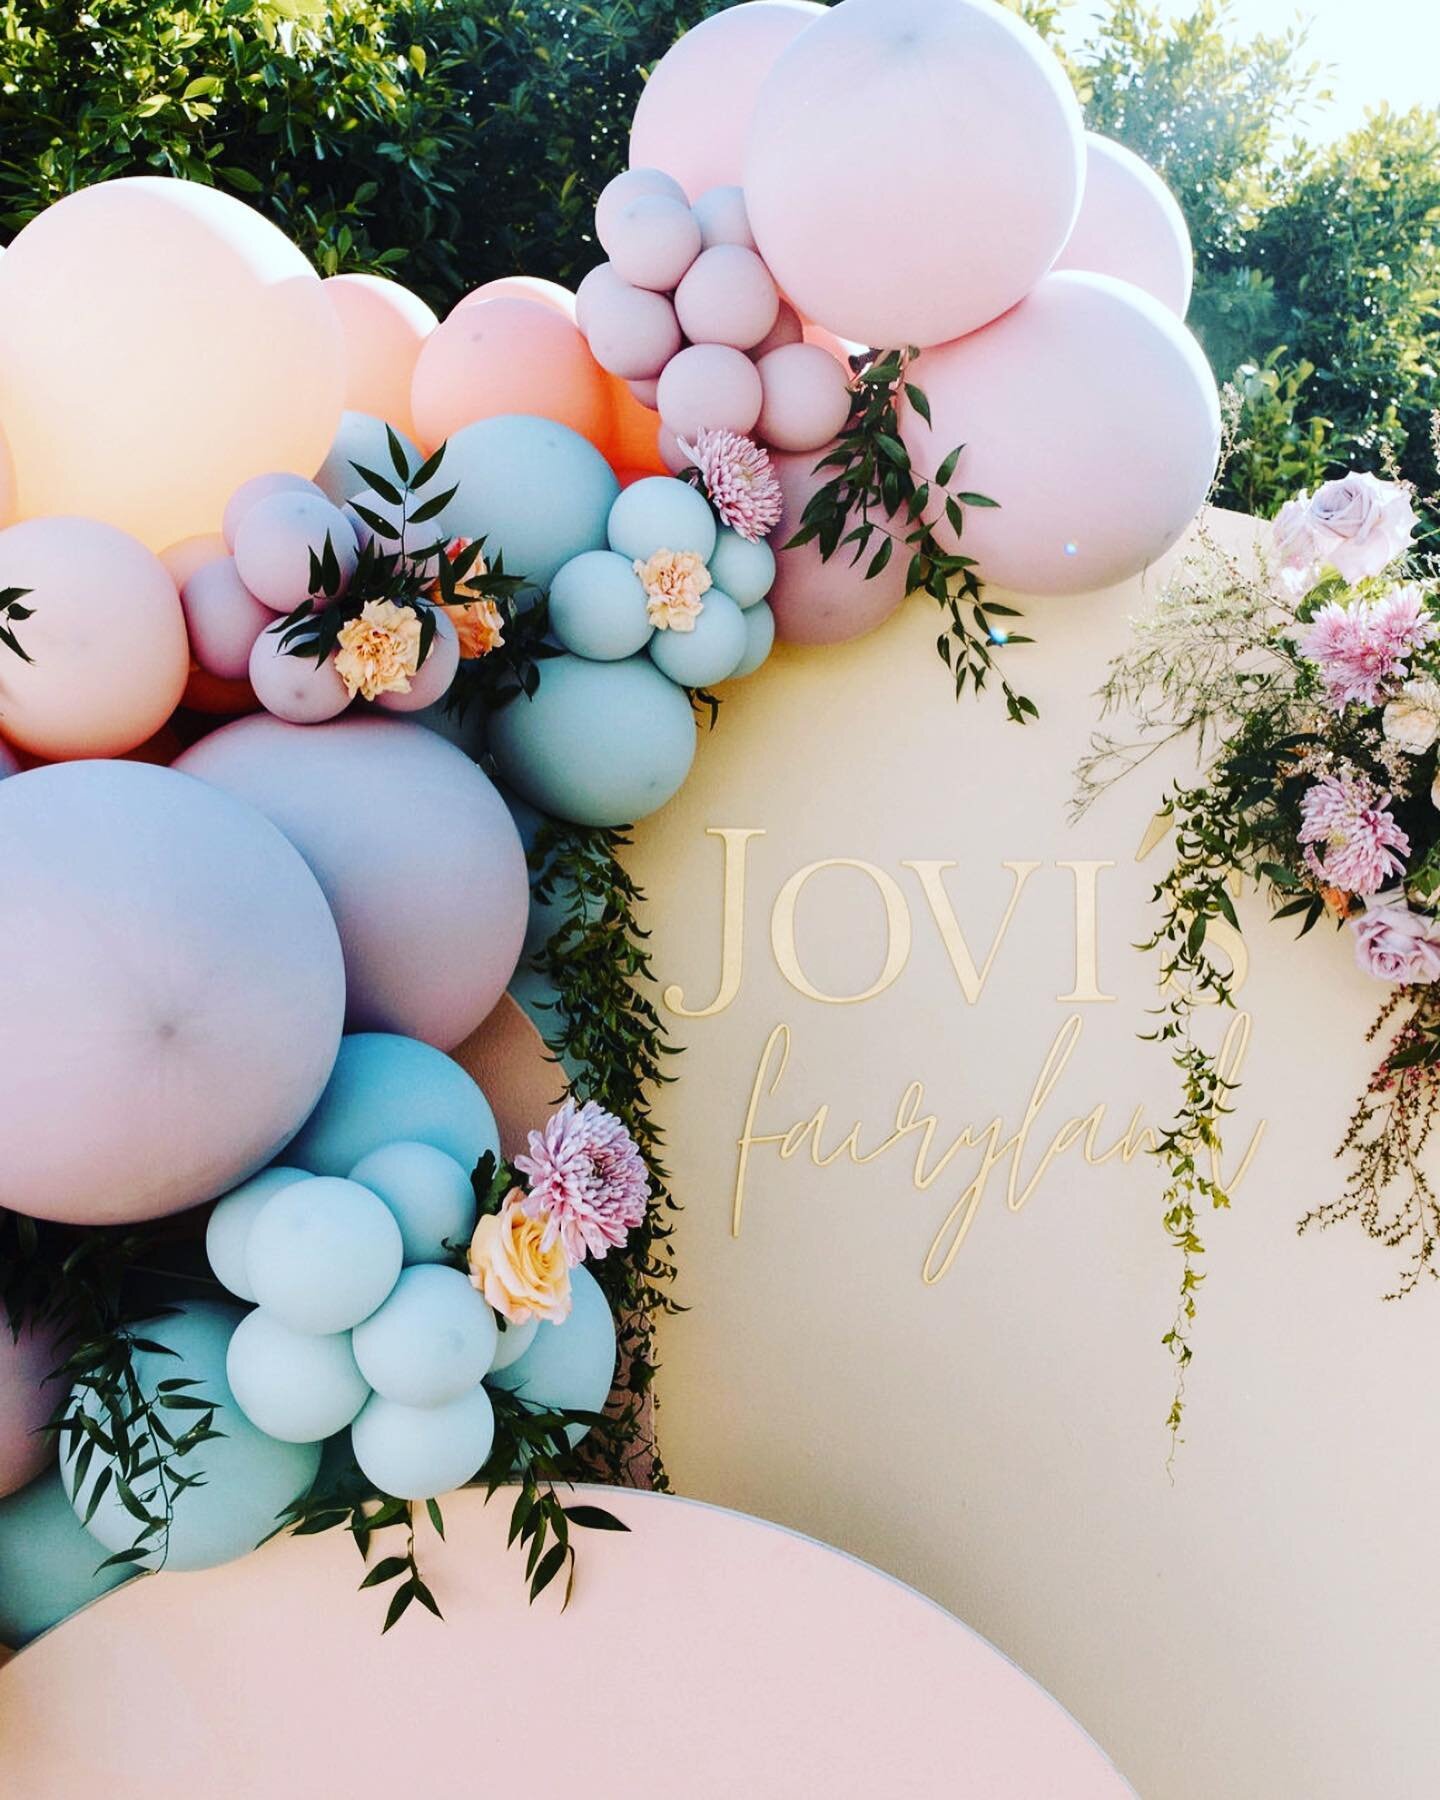 &ldquo;Life itself is the most wonderful fairy tale.&rdquo;-Hans Christian Andersen
 

Design, Backdrops &amp; Balloons-@createandinflateevents 
Table top design: @createandinflateevents and @daisyheadfloralco
Bounce House- @inflatefortyeight 
Floral